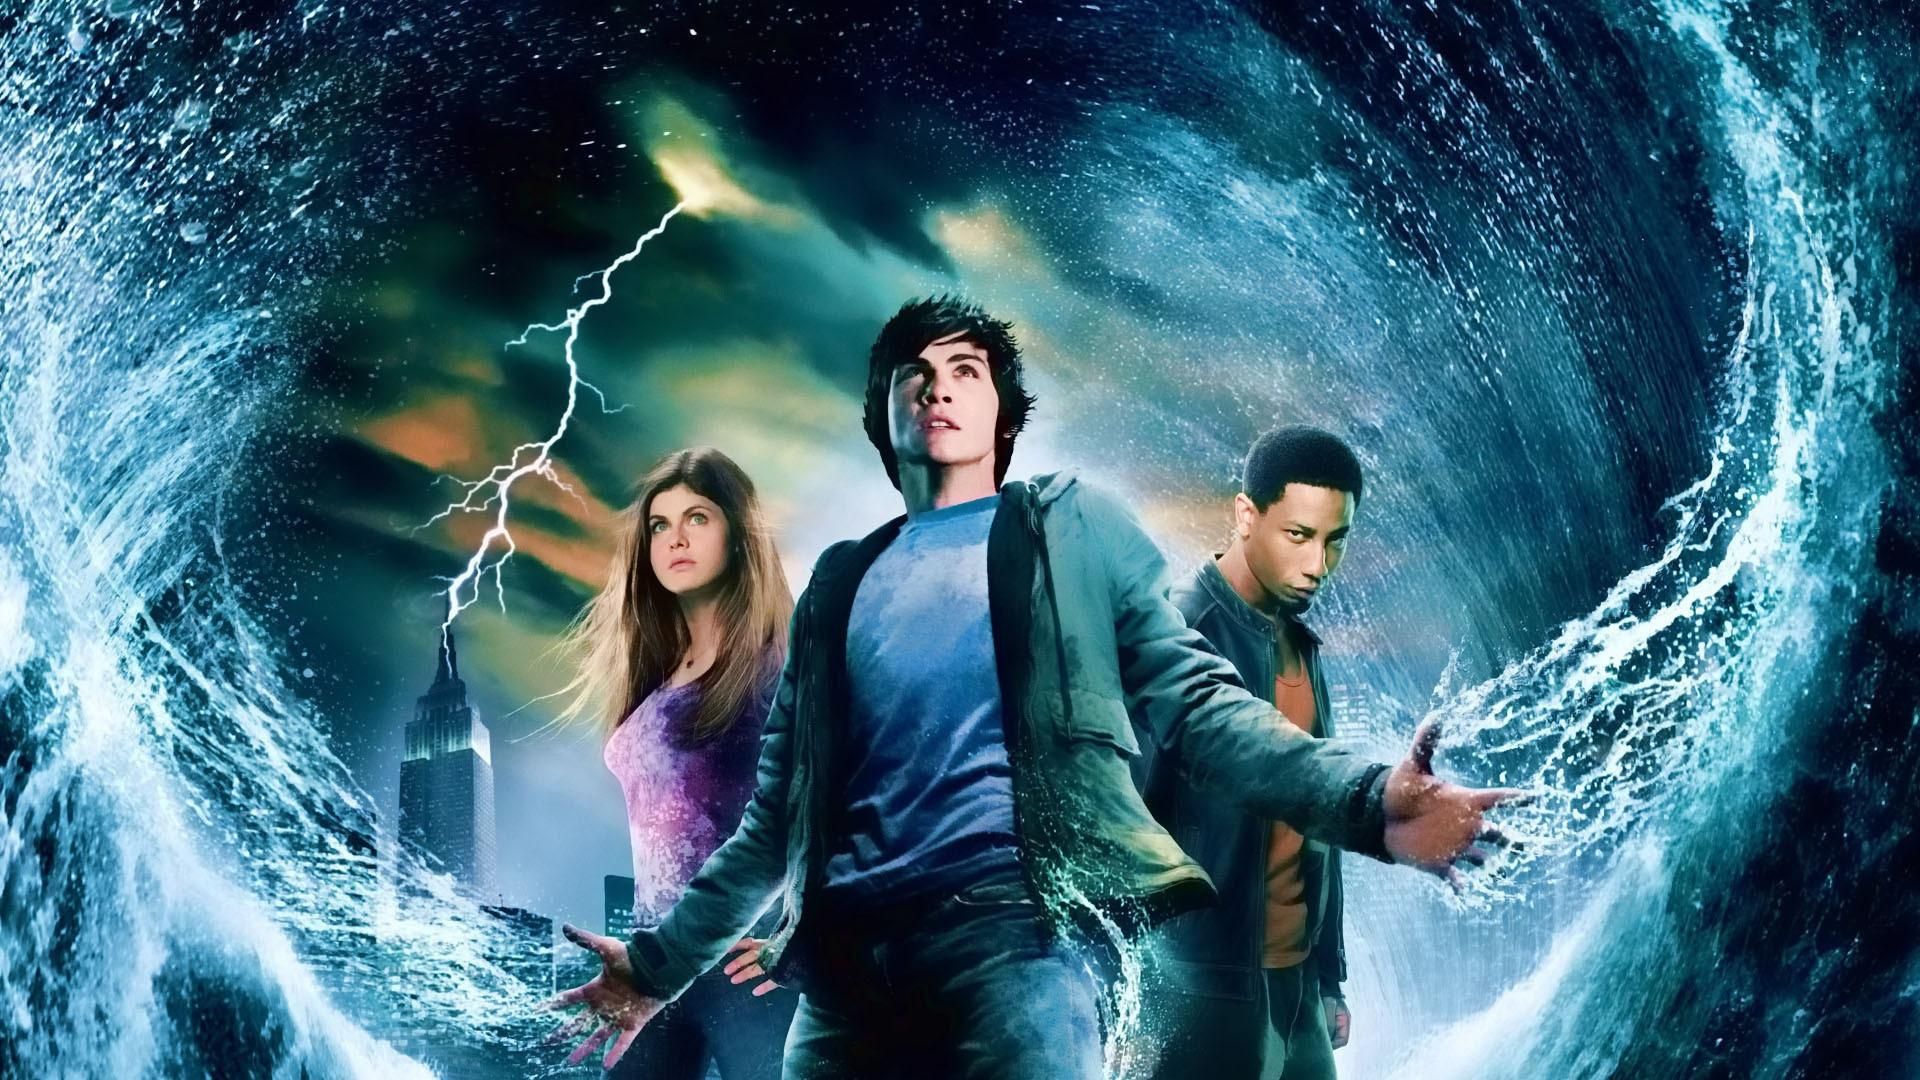 Percy Jackson & the Olympians: The Lightning Thief background